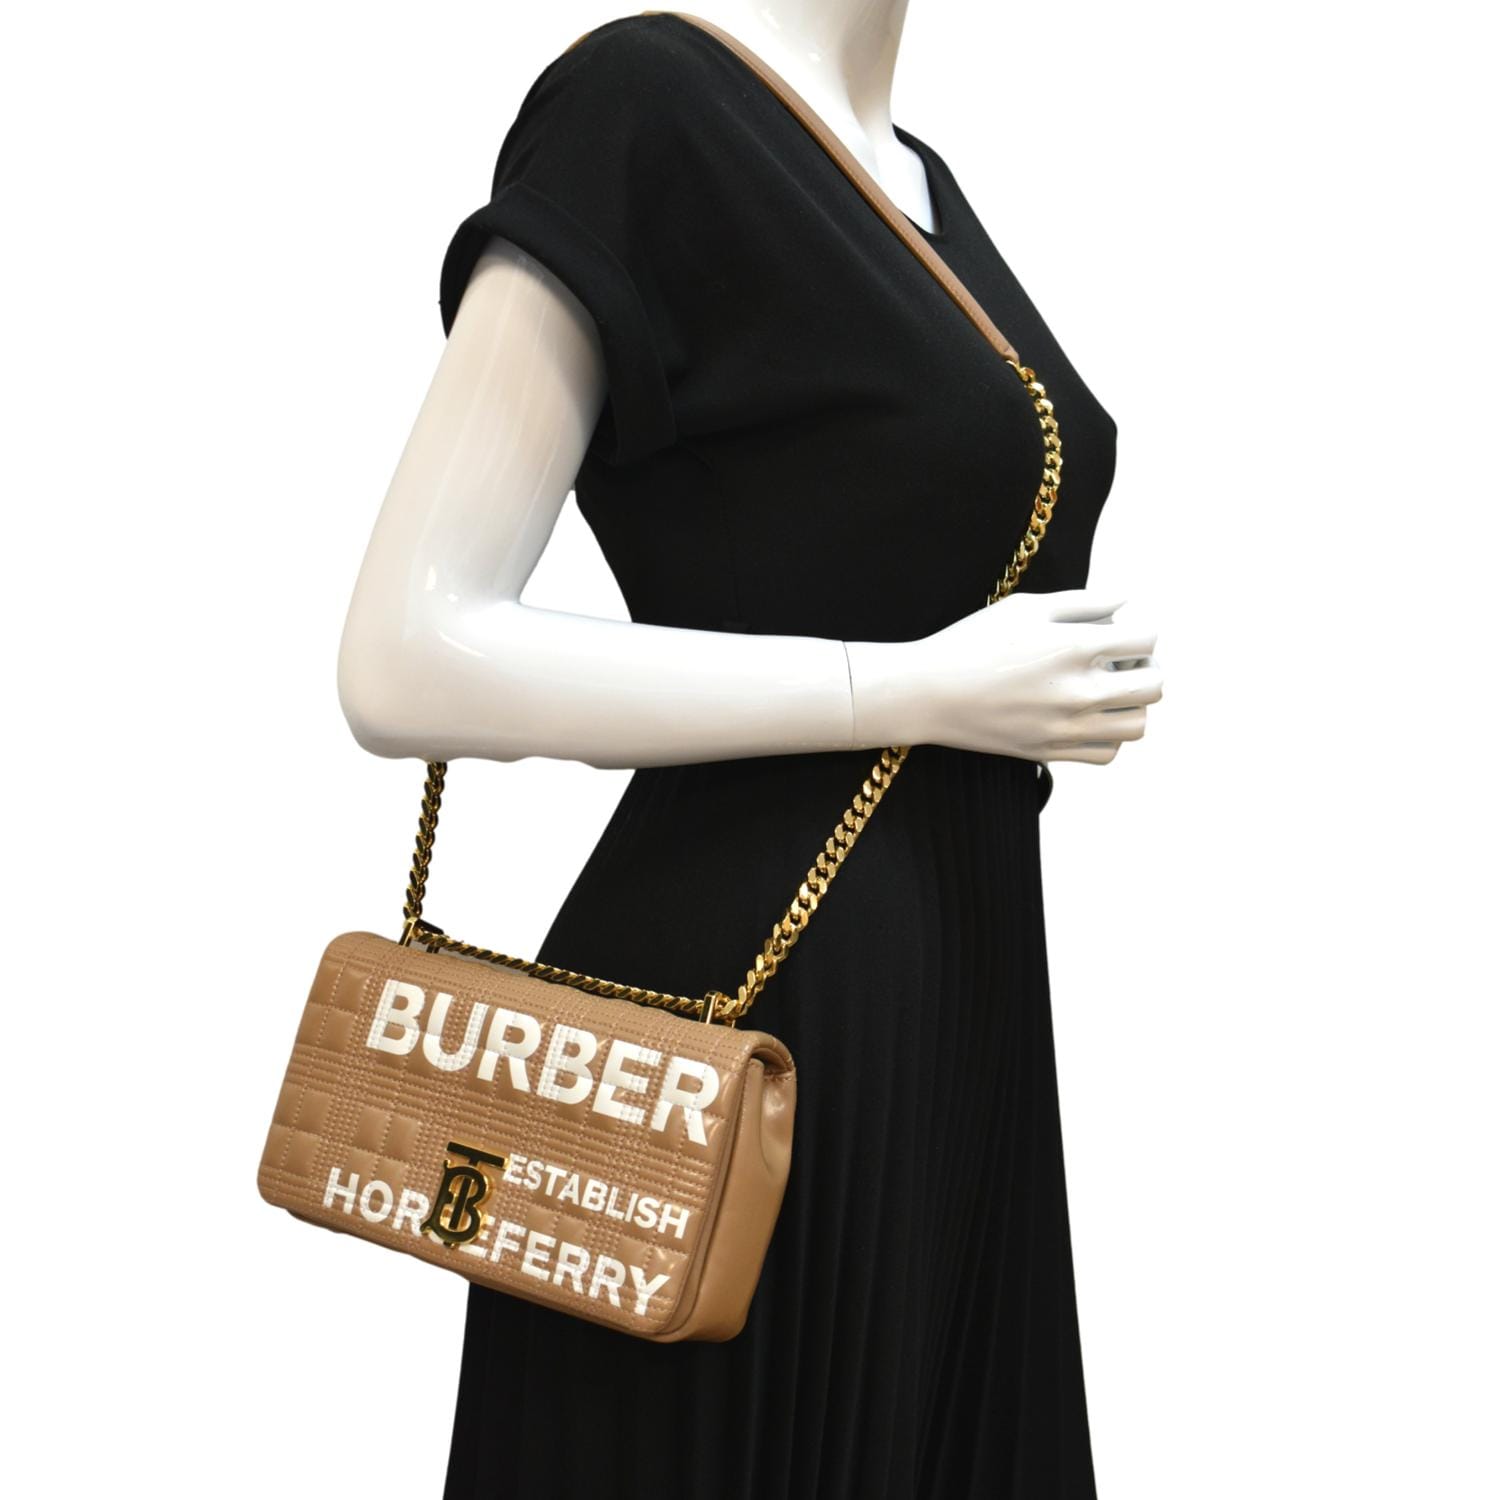 Buy Burberry bags and purses on sale